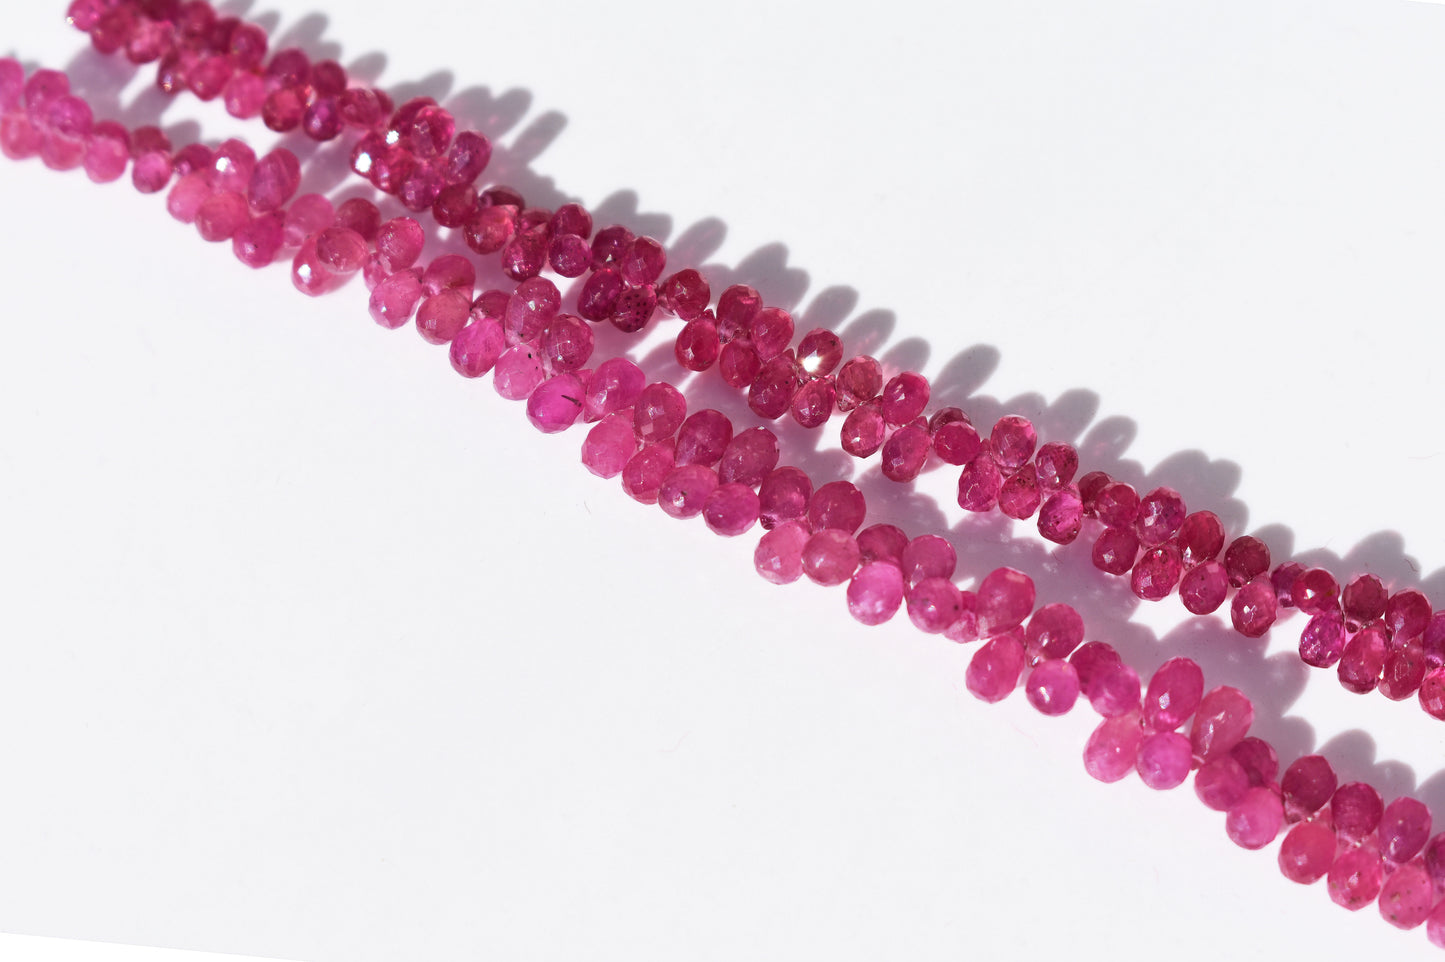 Ruby Briolette Beads - Graduated Drop Beads 2.25-3mm